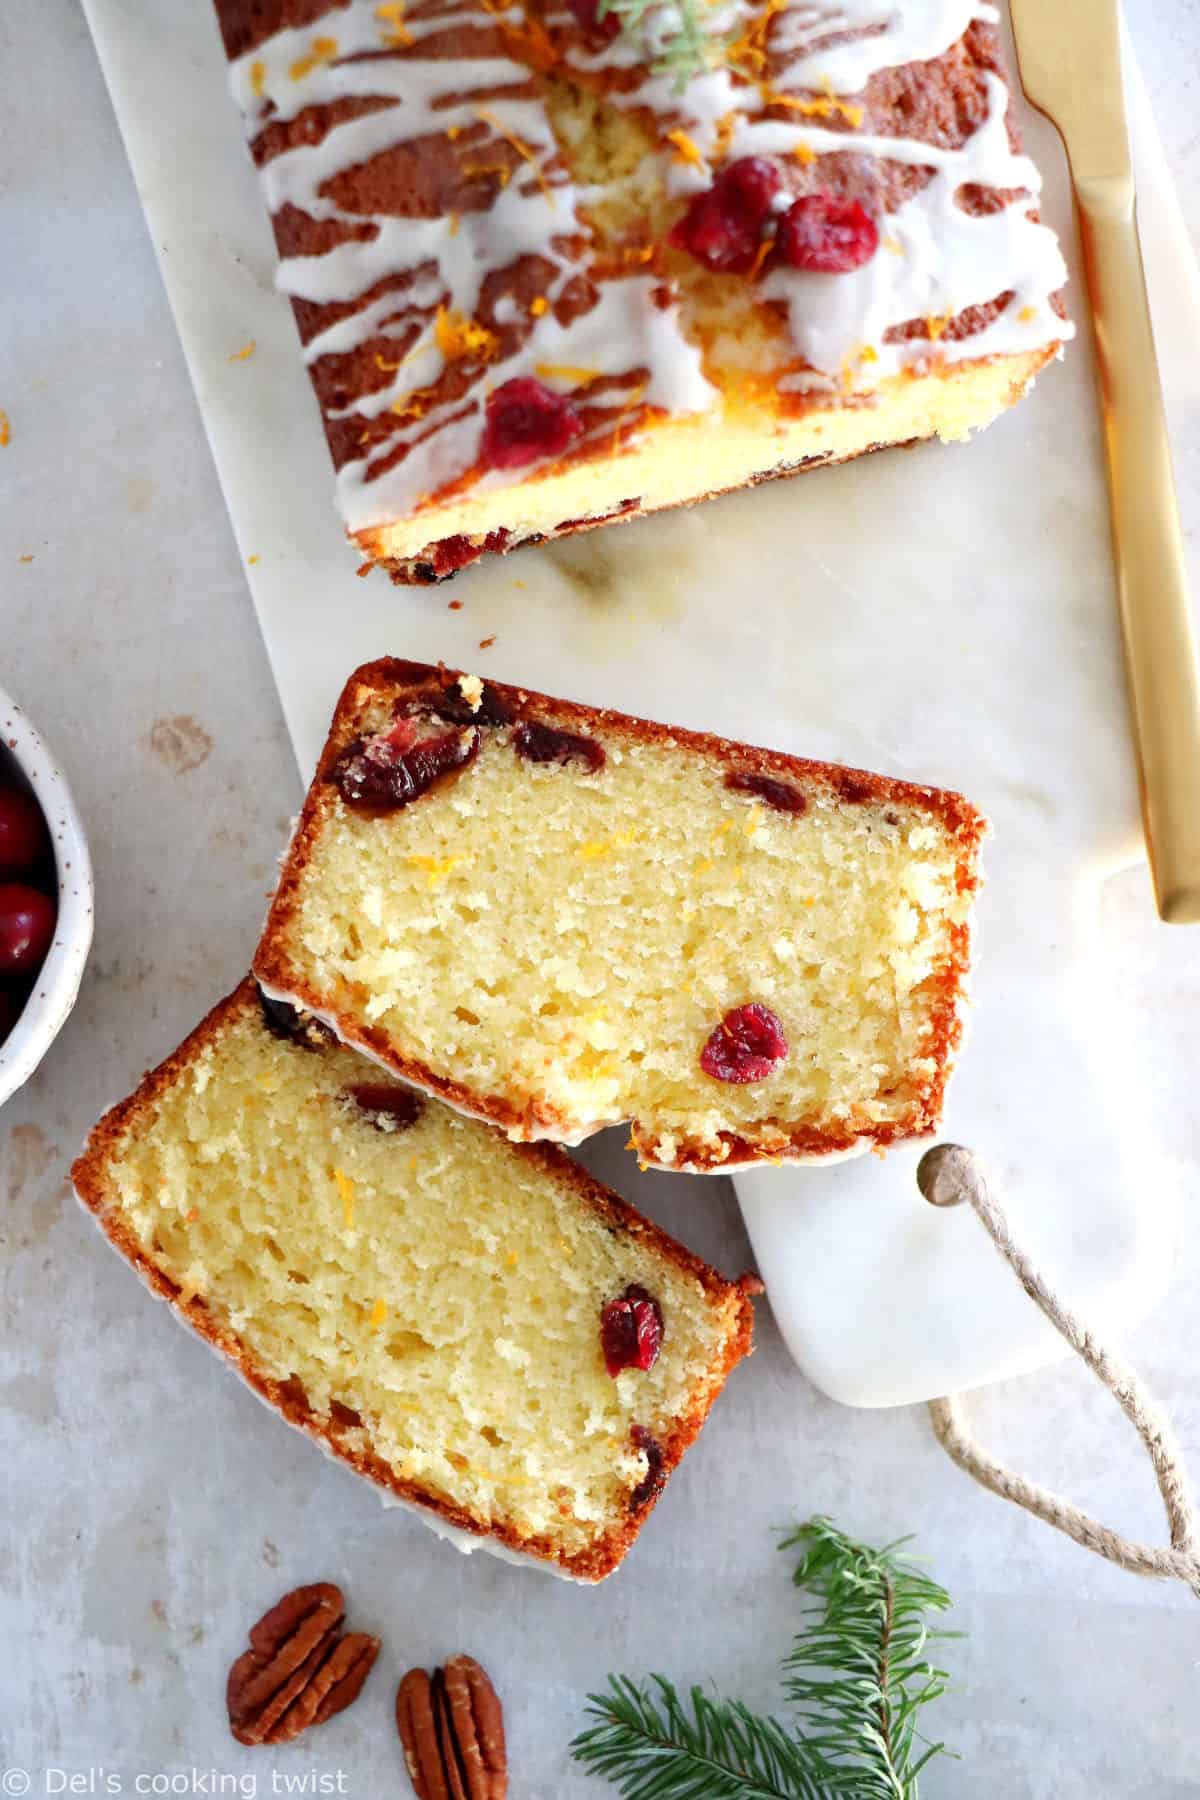 This easy orange cranberry pound cake is rich, buttery, subtly flavored with orange and loaded with dried cranberries.